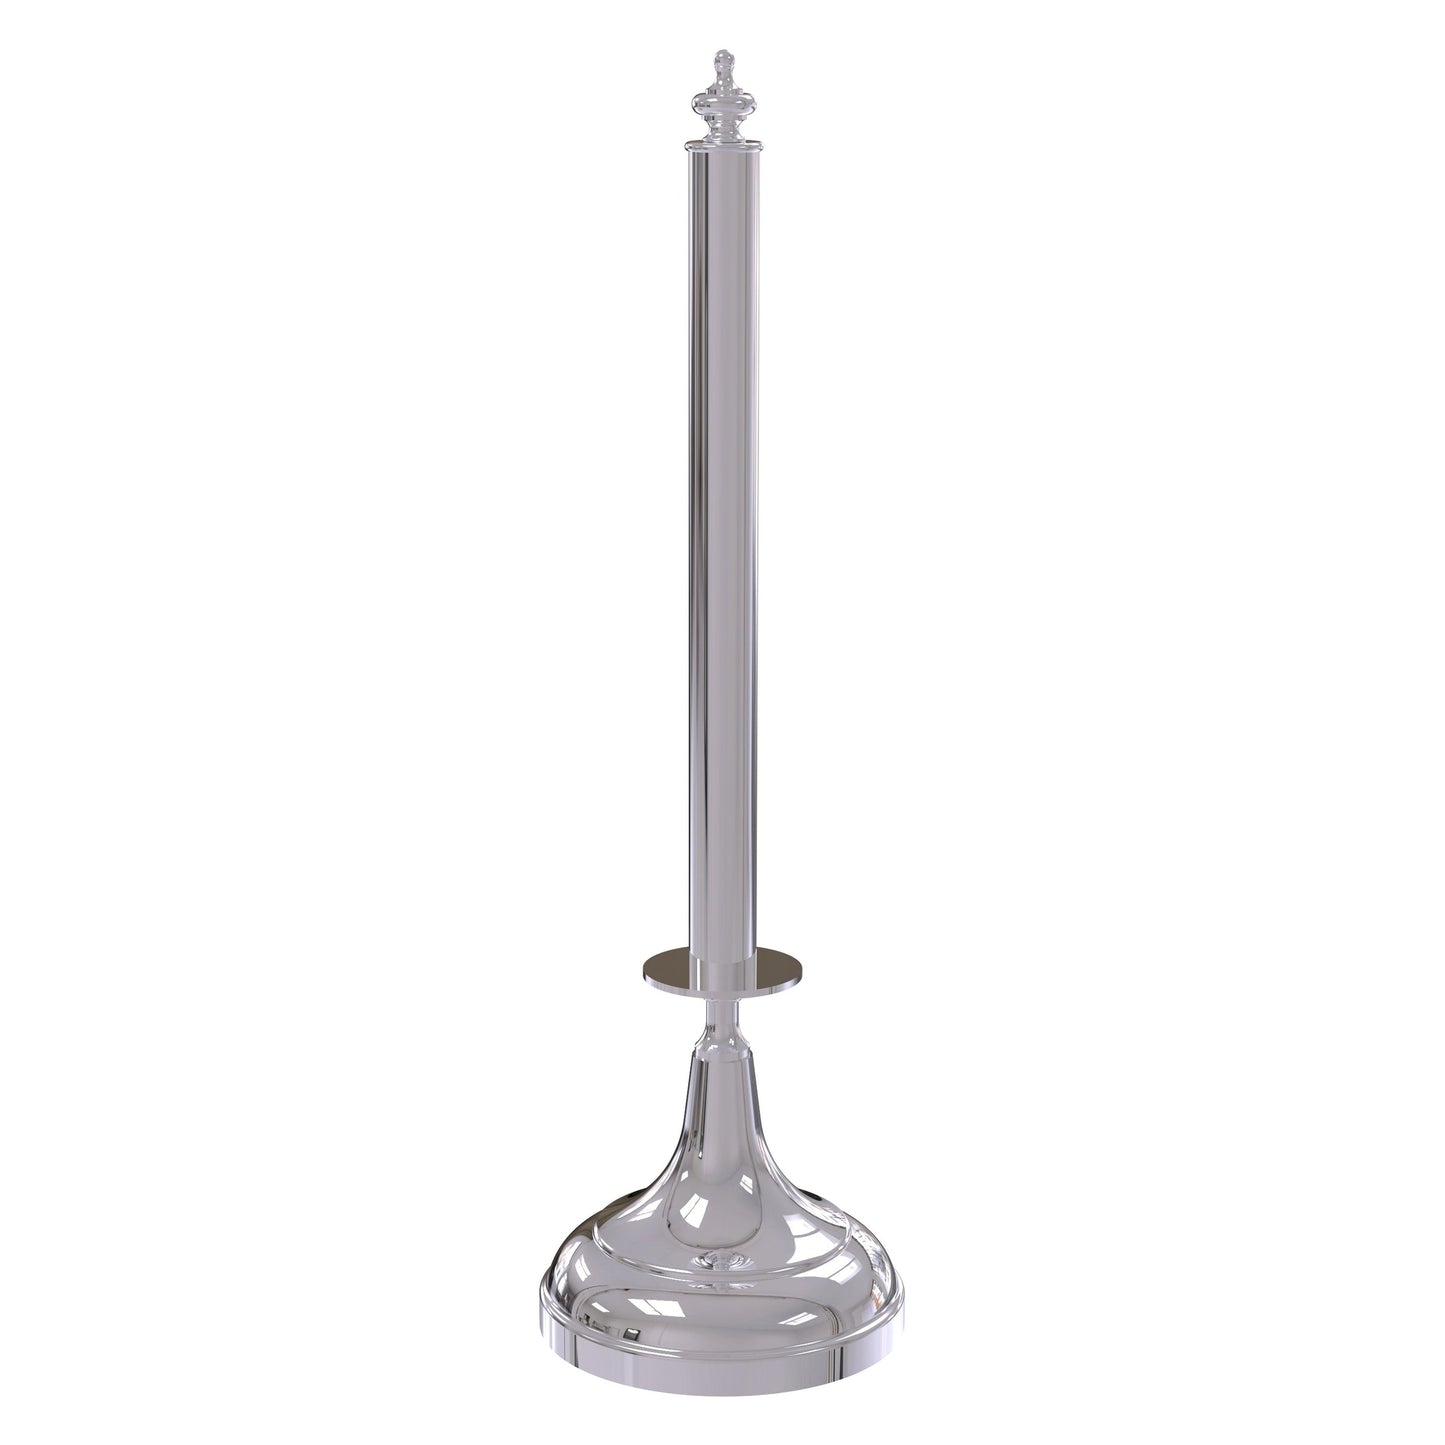 Allied Brass 1052 5.5" Polished Chrome Solid Brass Paper Towel Holder